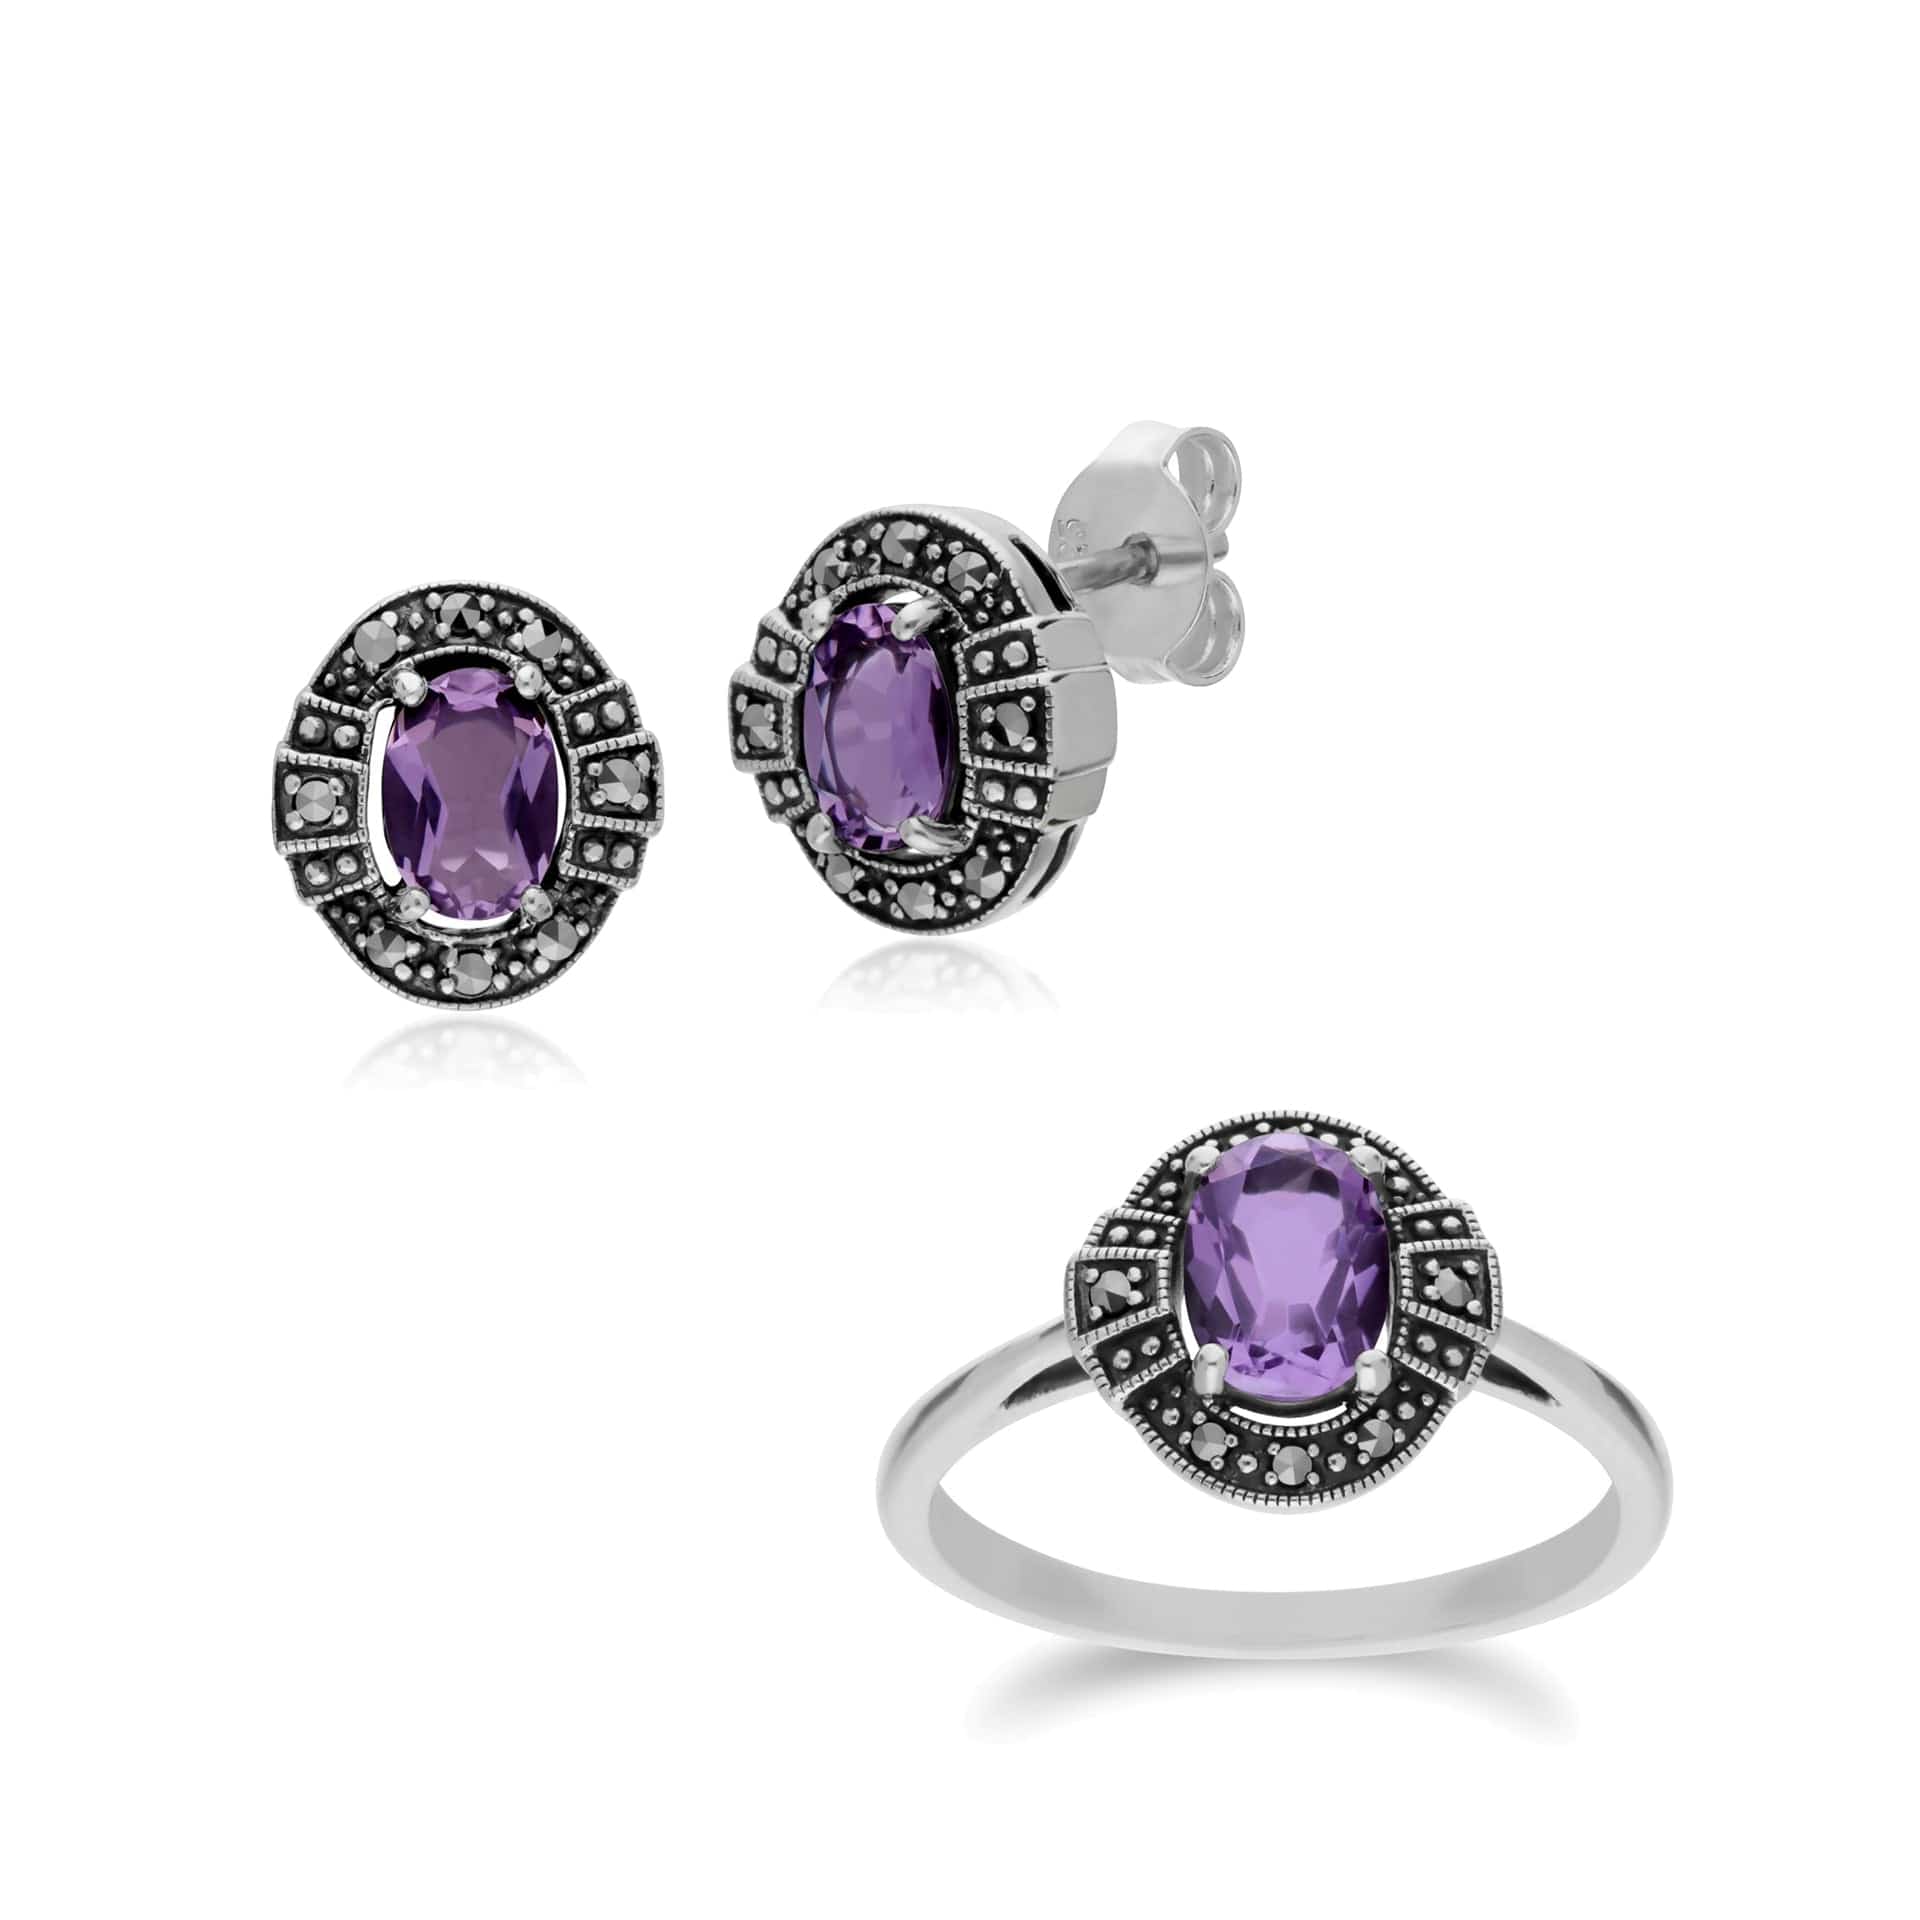 214E873002925-214R605702925 Art Deco Style Oval Amethyst and Marcasite Cluster Stud Earrings & Ring Set in 925 Sterling Silver 1